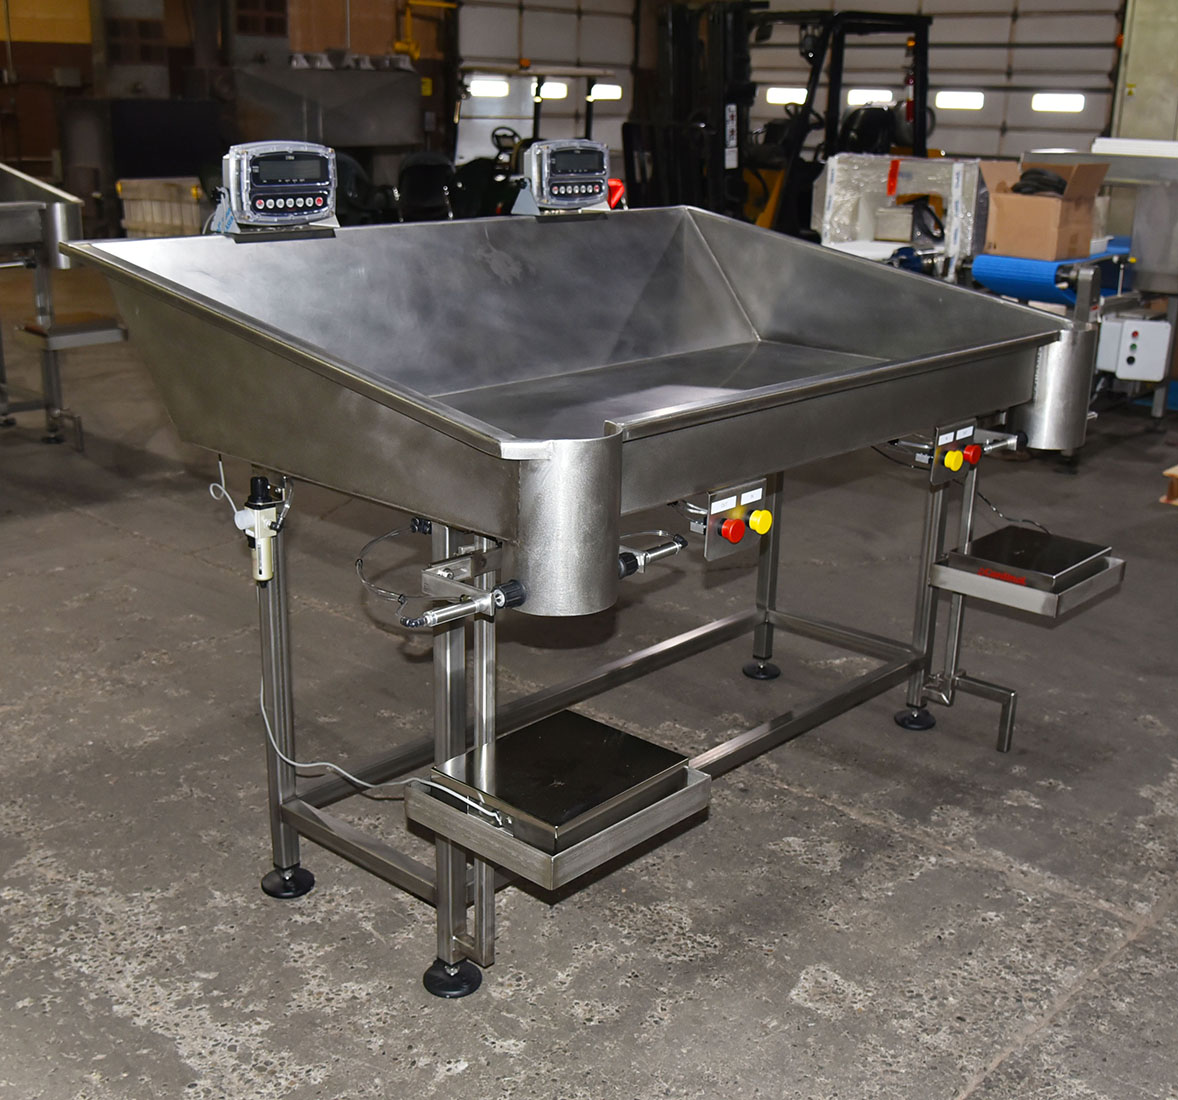 BAG PACKING TABLE, 2-station, food grade stainless steel, for fill by weight, in-stock new, Alard Equipment Corp item Y5693